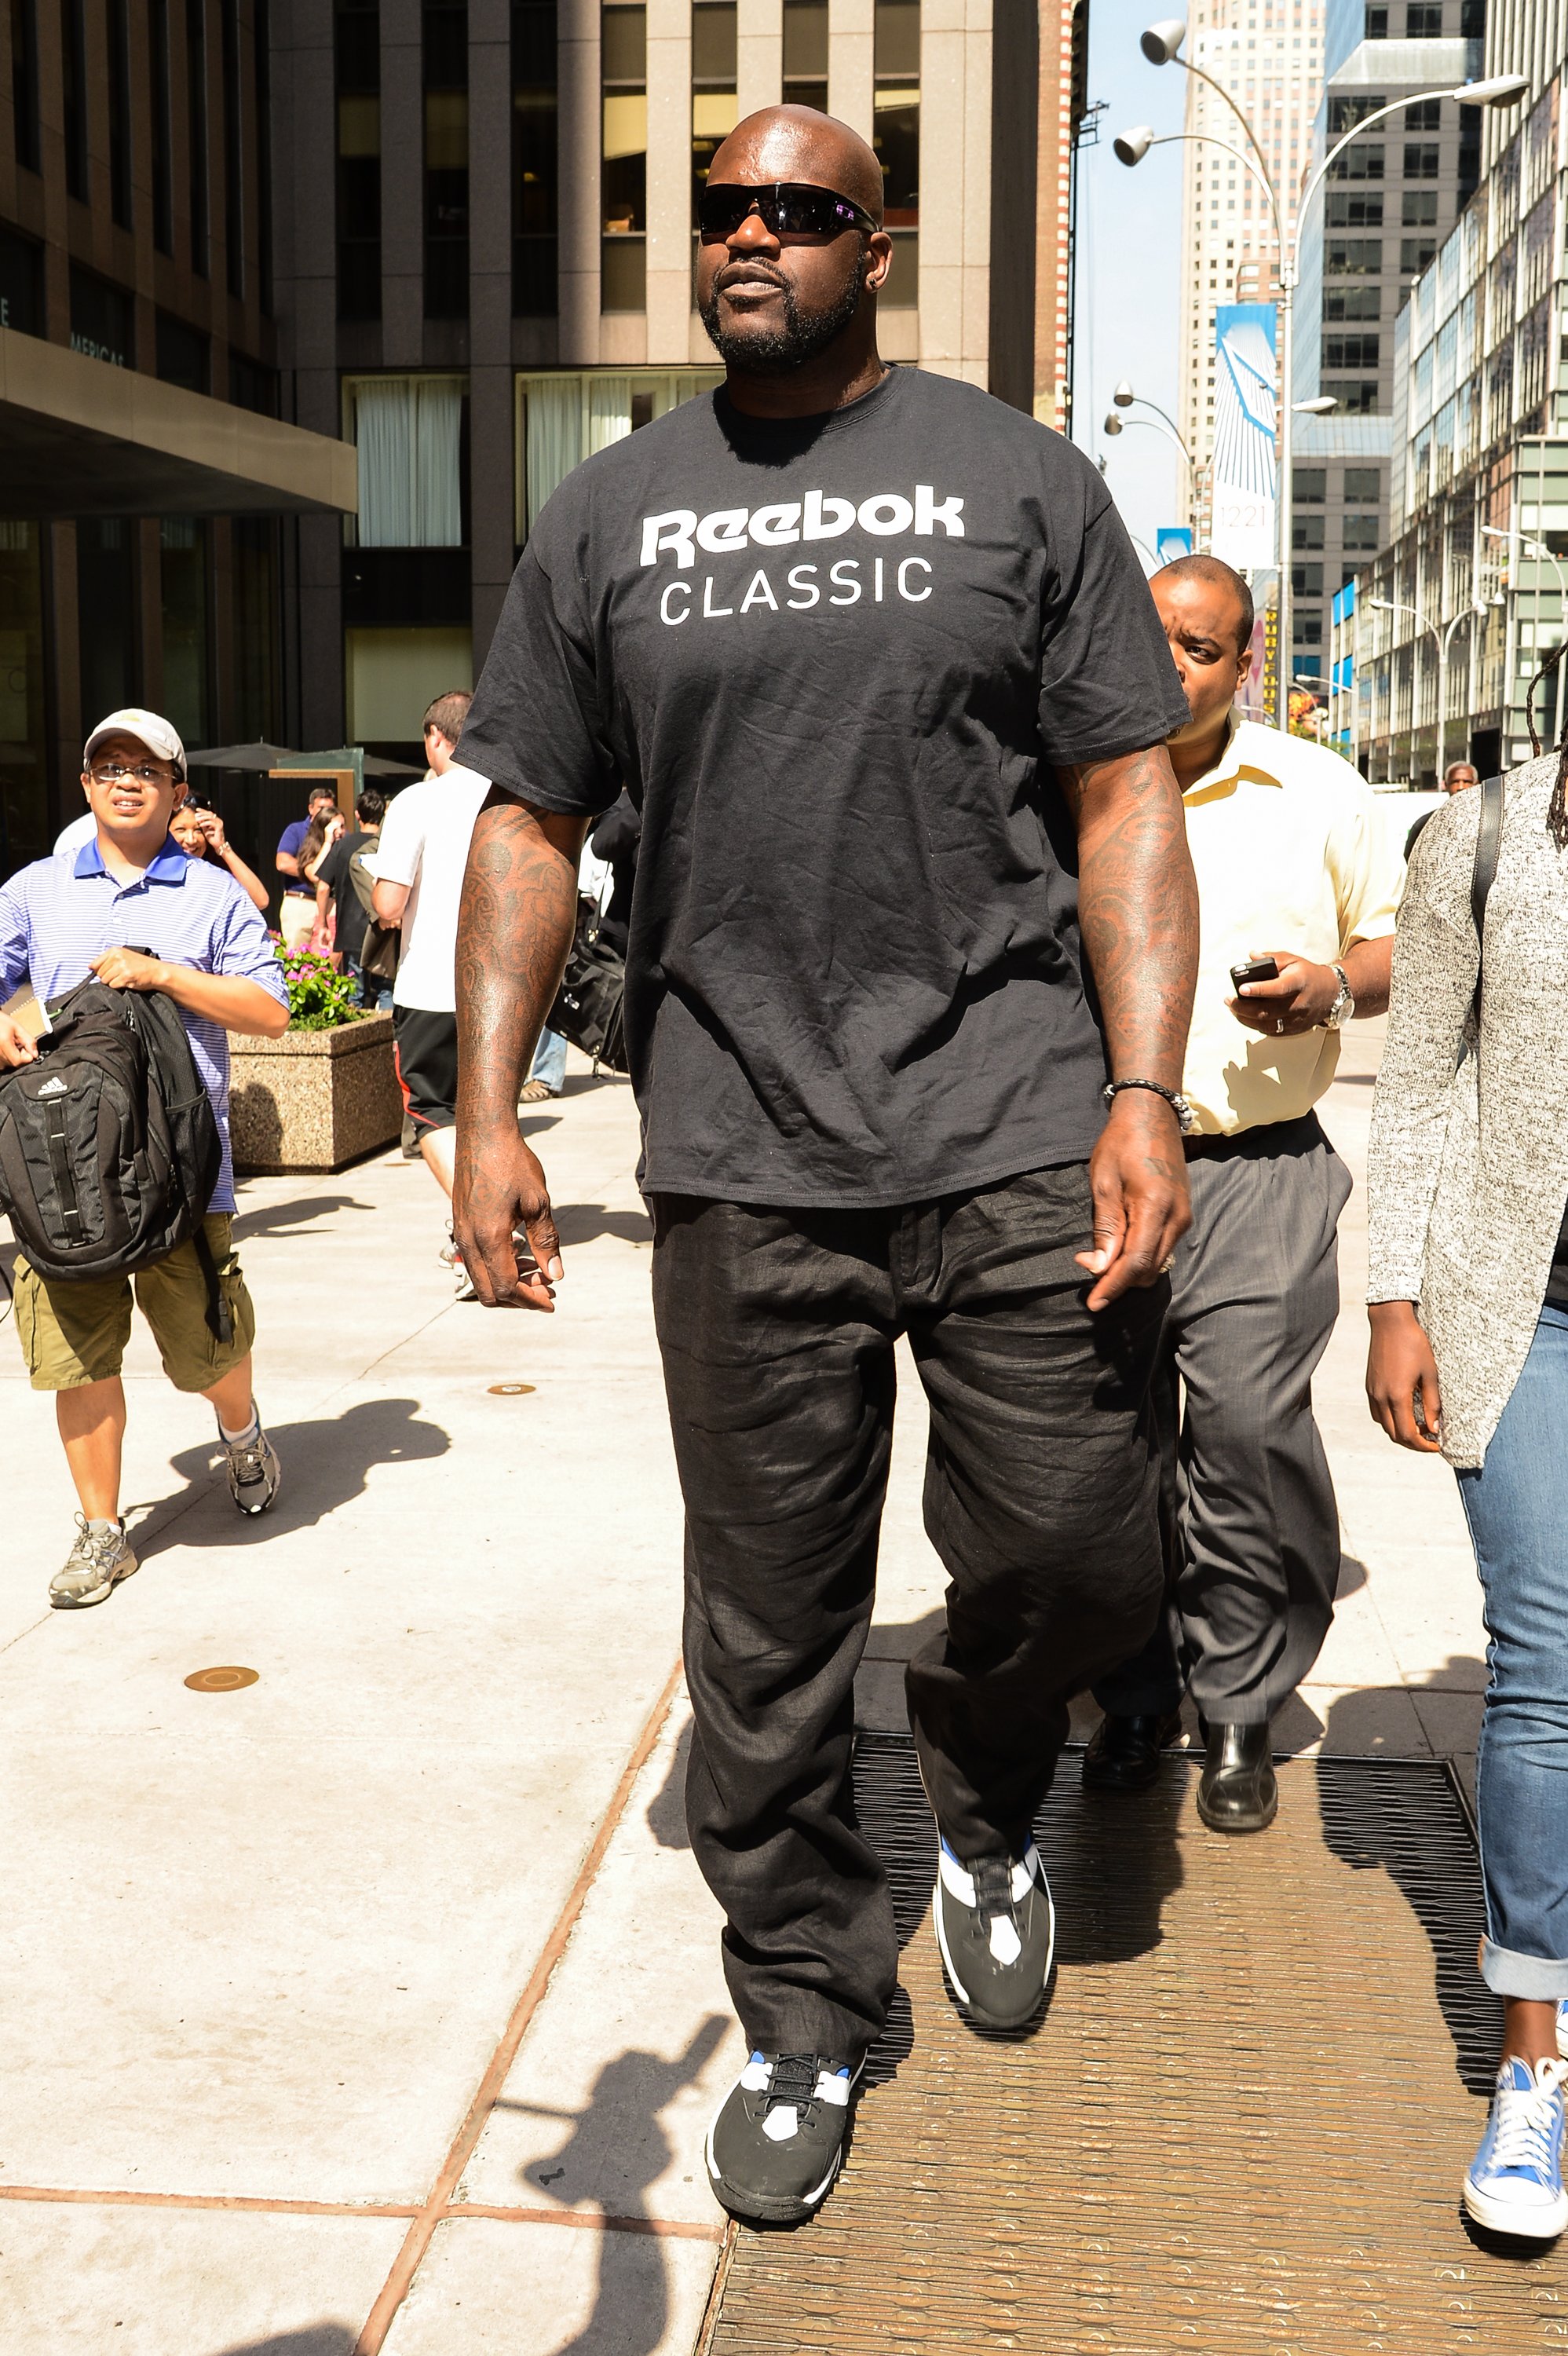 Television personality and former professional basketball player Shaquille O'Neal leaves the Sirius XM Studios in New York City on Aug. 11, 2014. (Ray Tamarra—GC Images/Getty Images)